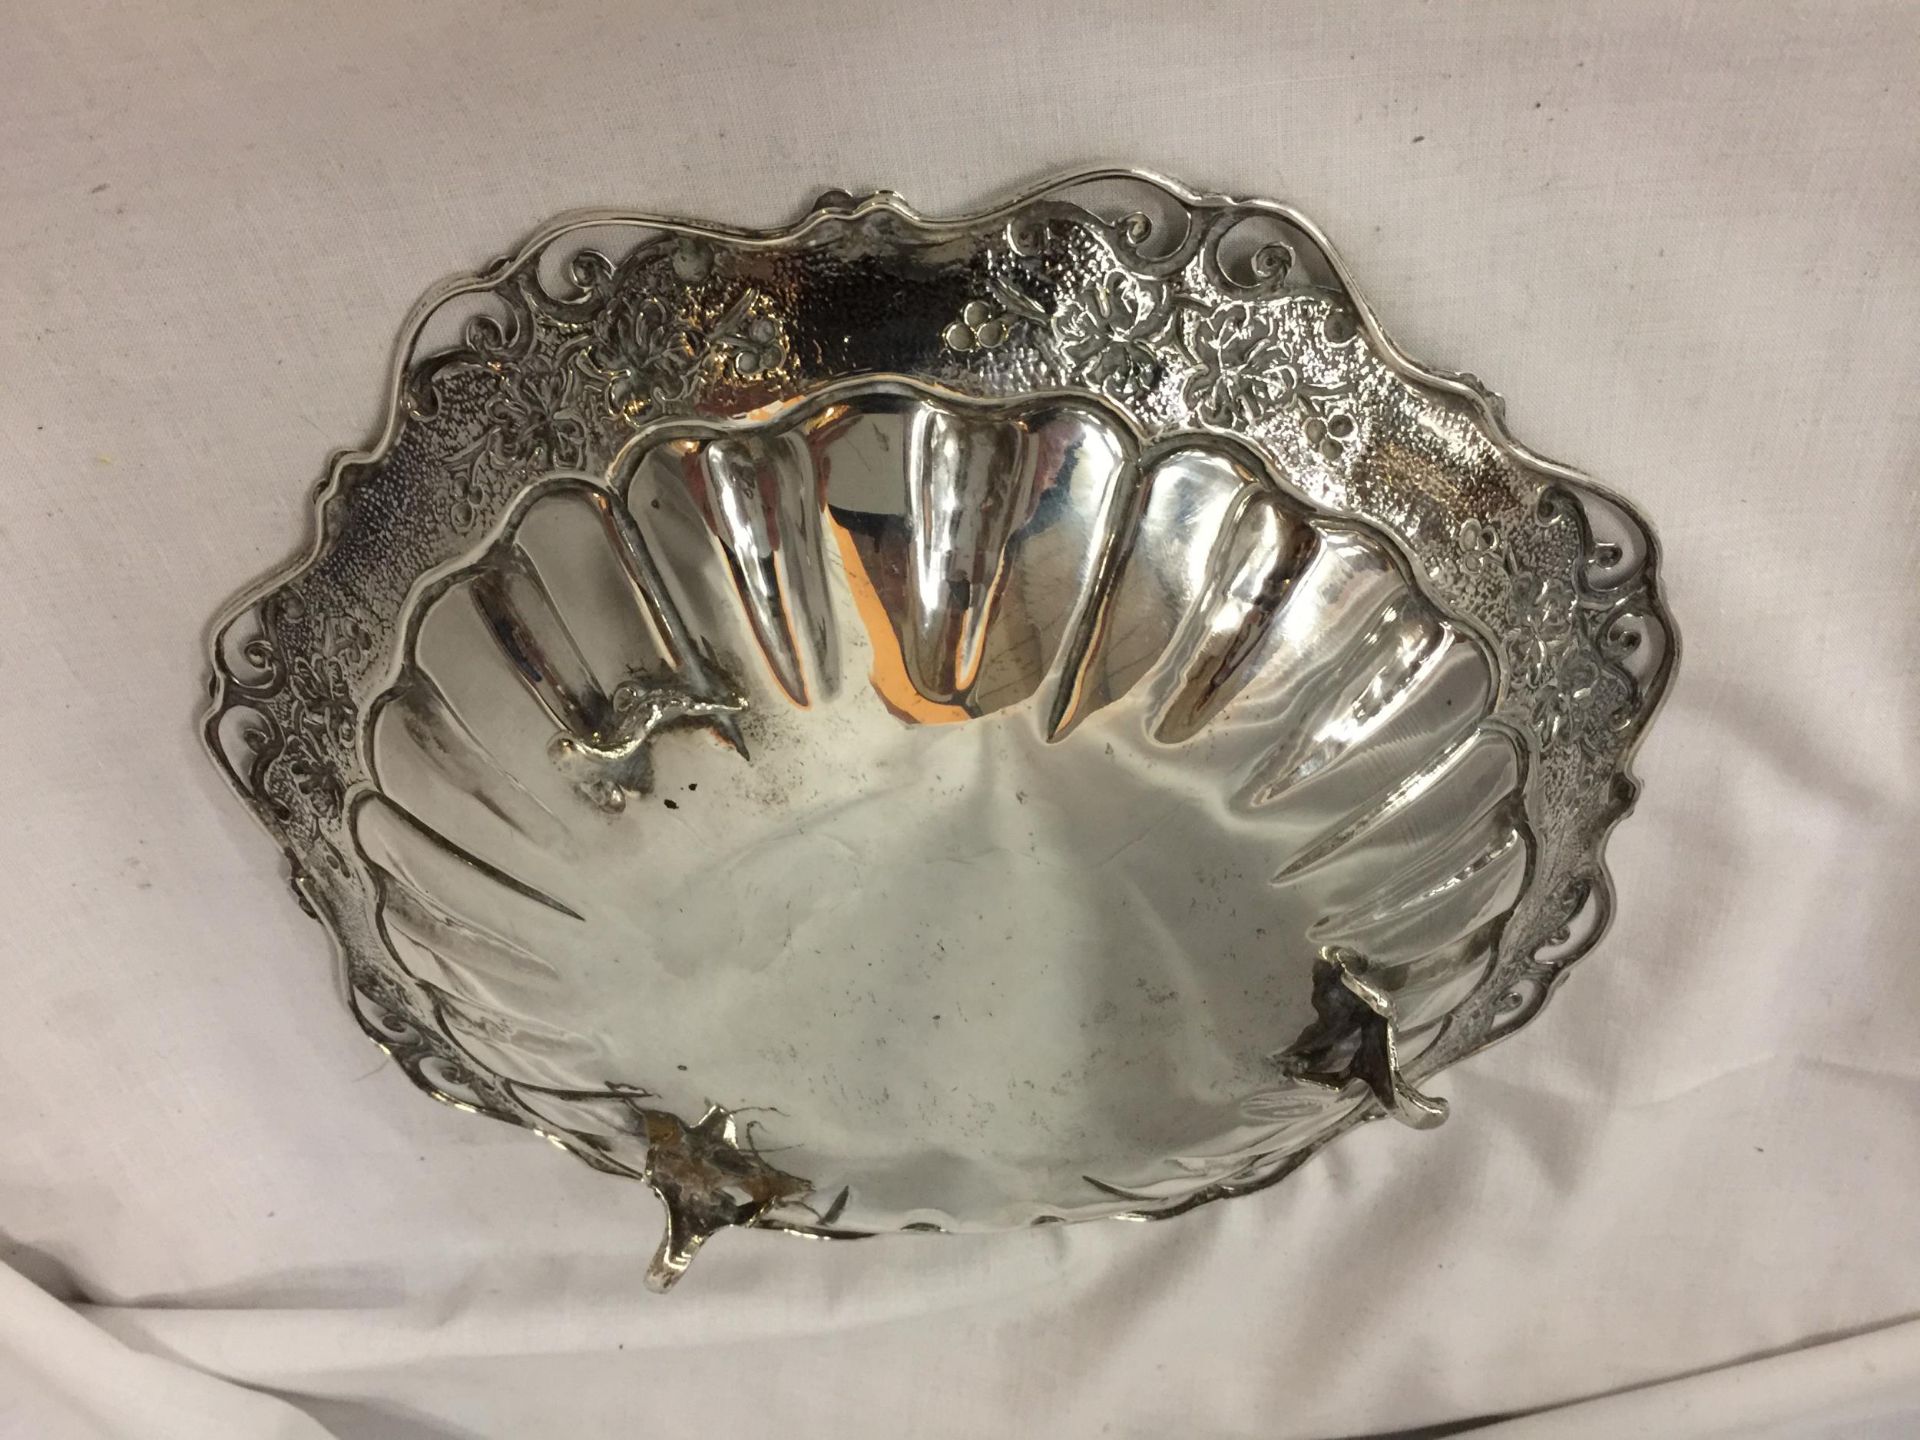 A DECORATIVE CONTINETAL SILVER DISH GROSS WEIGHT 358 GRAMS - Image 3 of 4